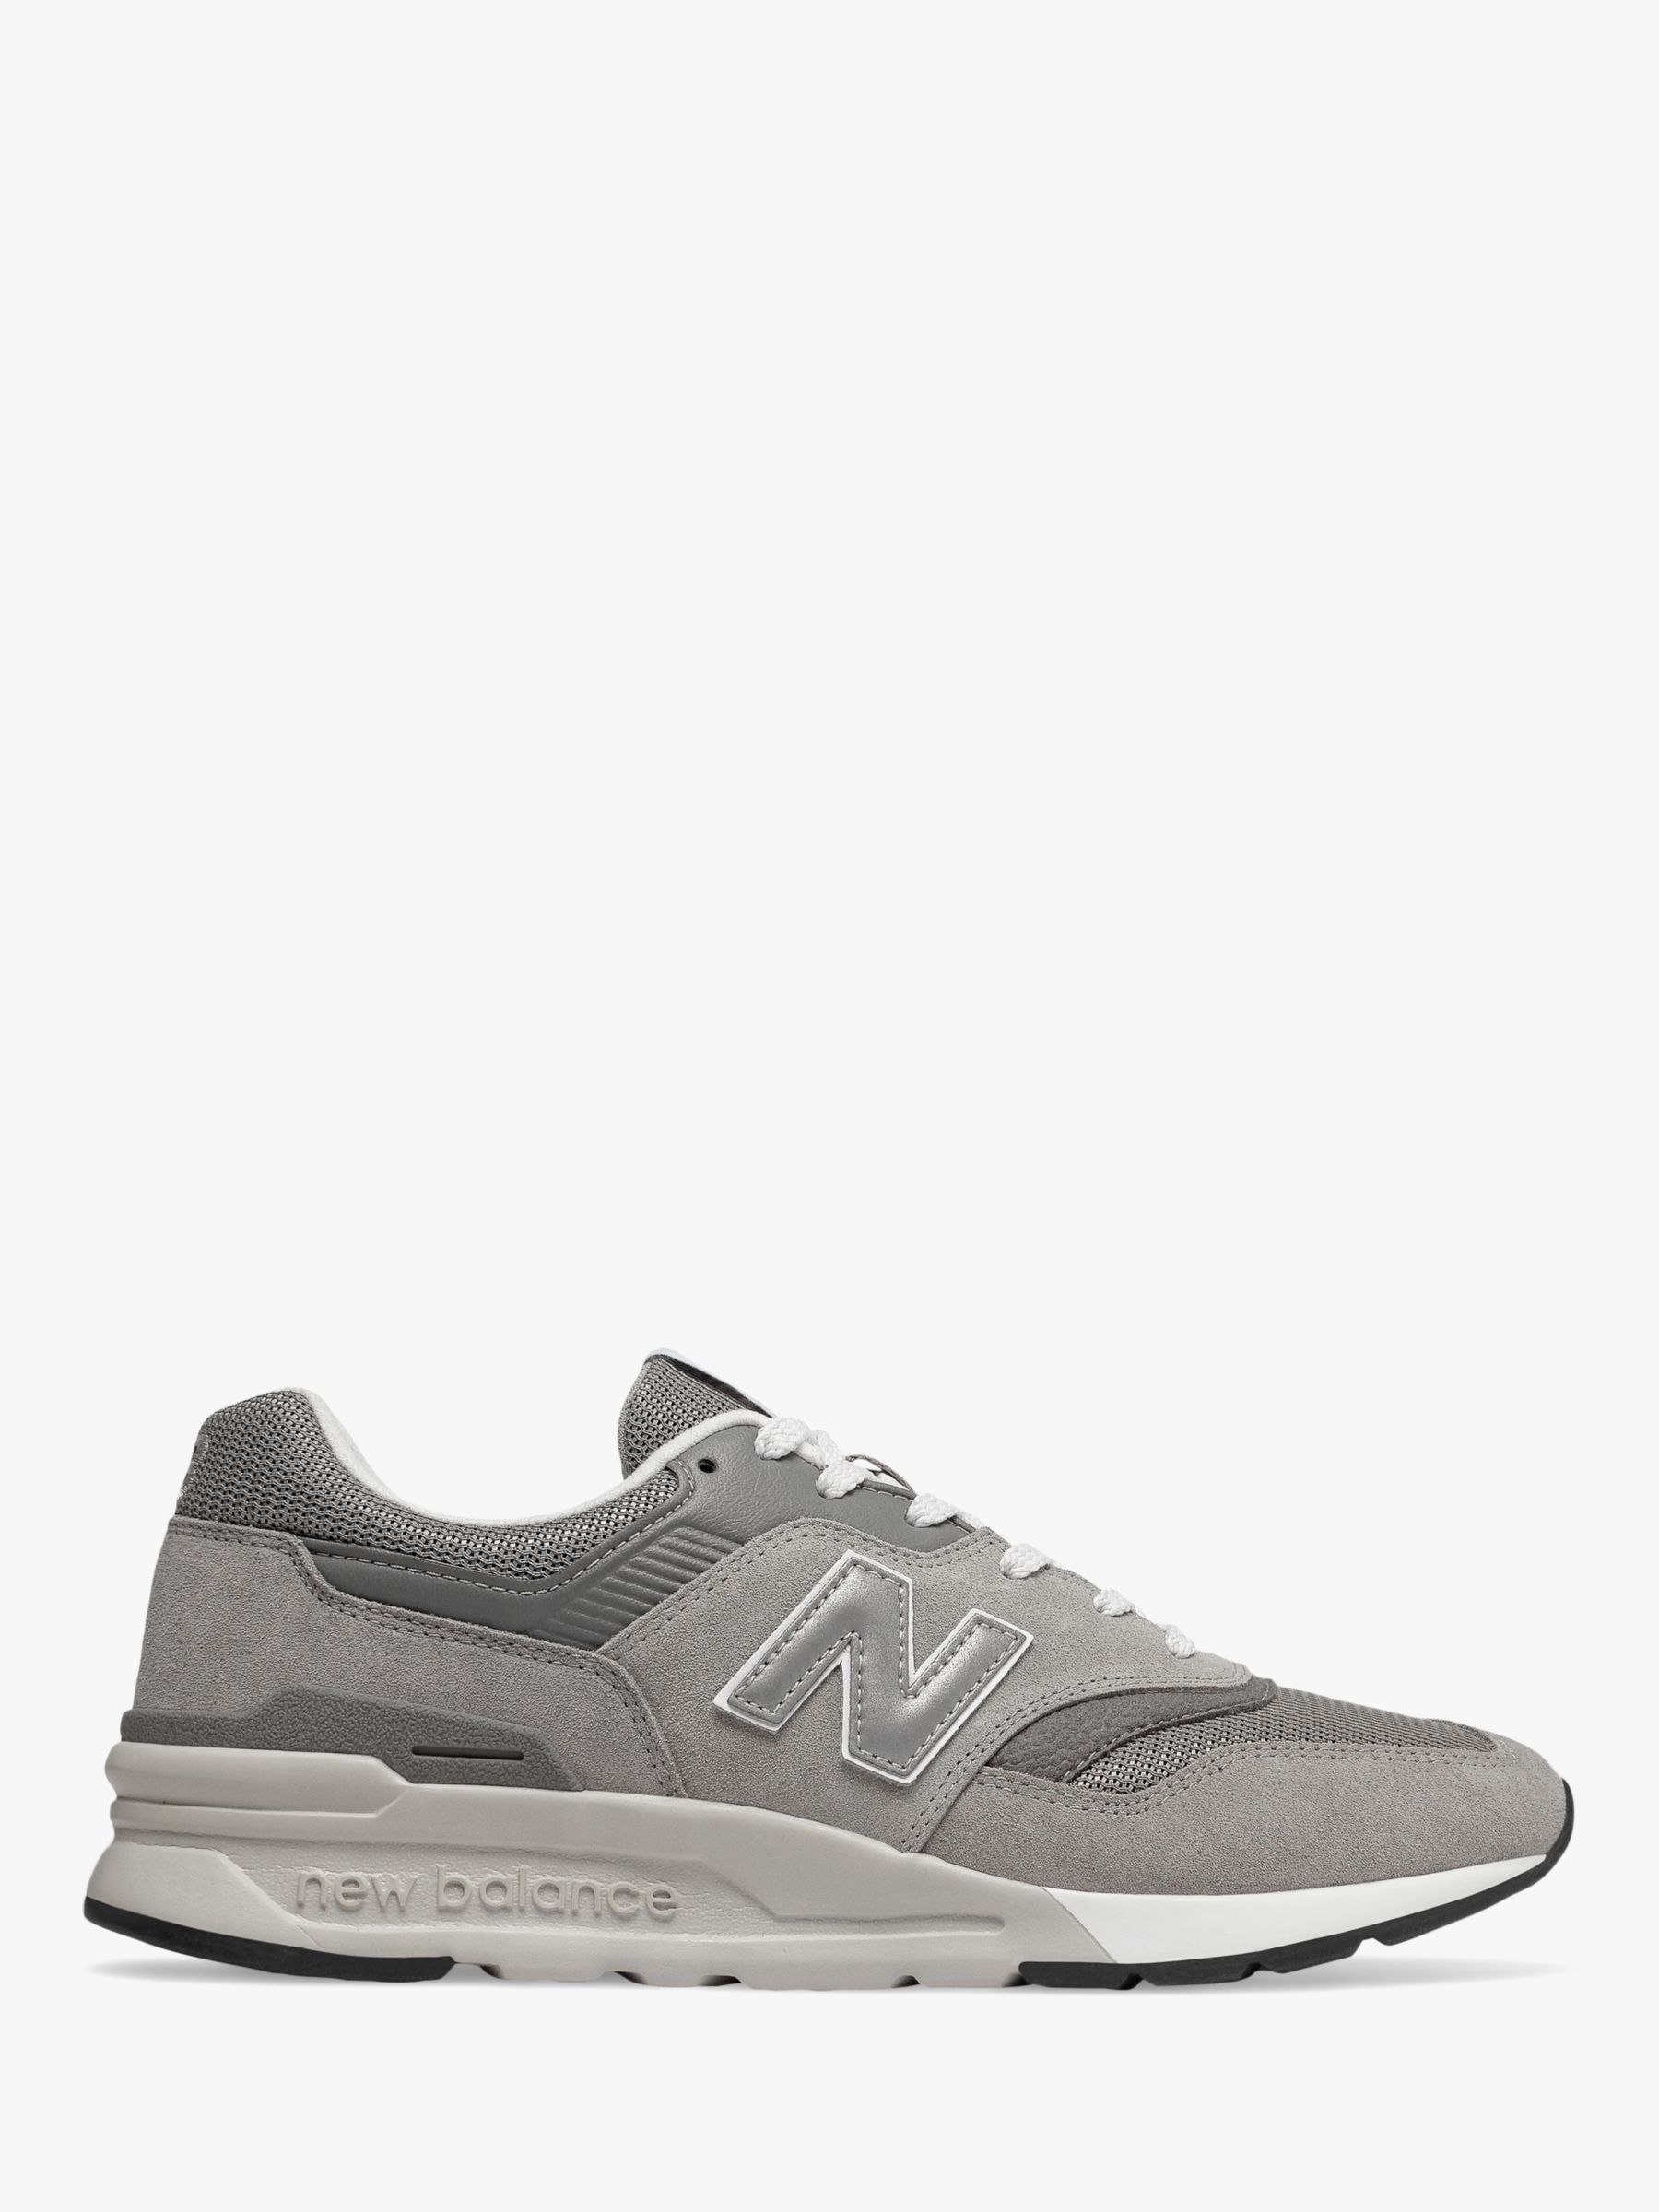 New Balance 997H Men's Suede Trainers, Grey, 7